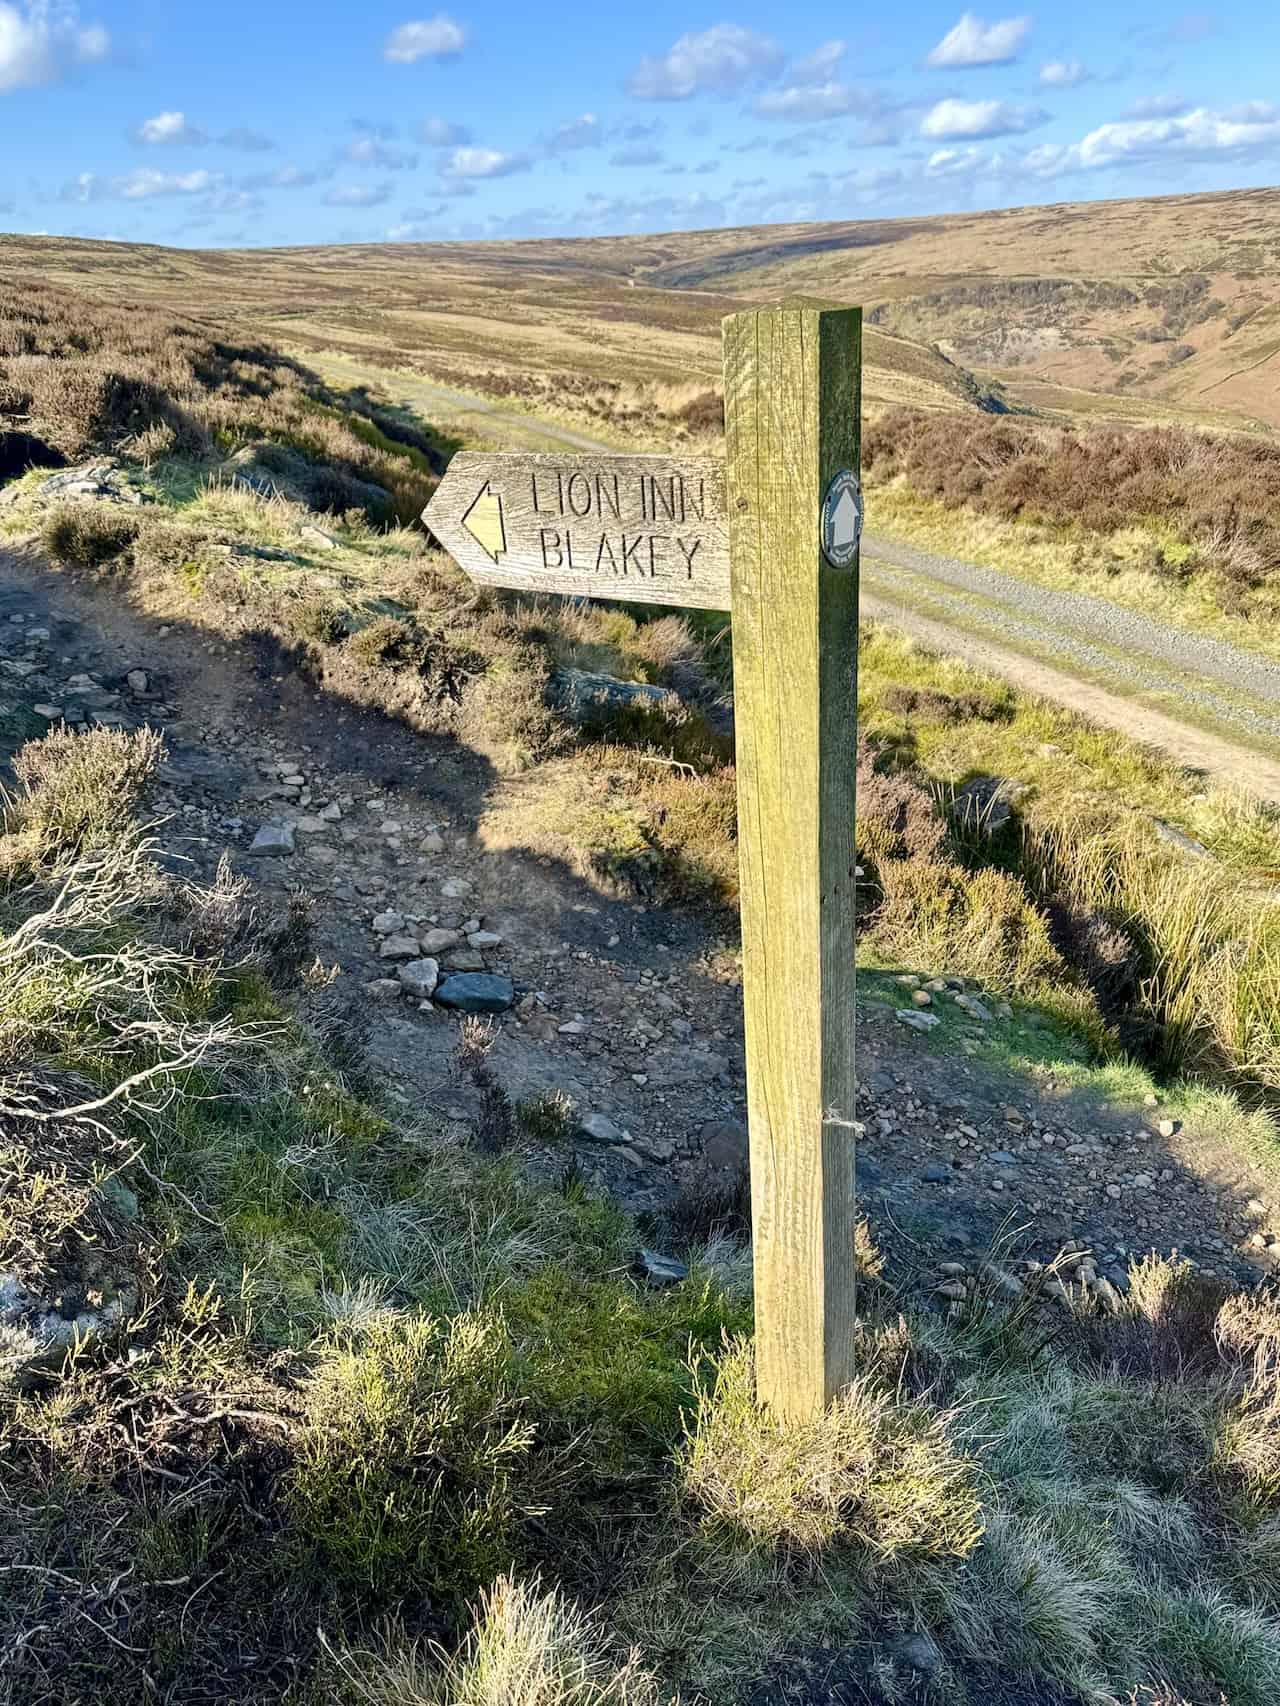 The Rosedale Railway walk concludes with a footpath leading off the trackbed of the old railway, signposted towards the Lion Inn Blakey, marking a memorable end to this scenic journey.